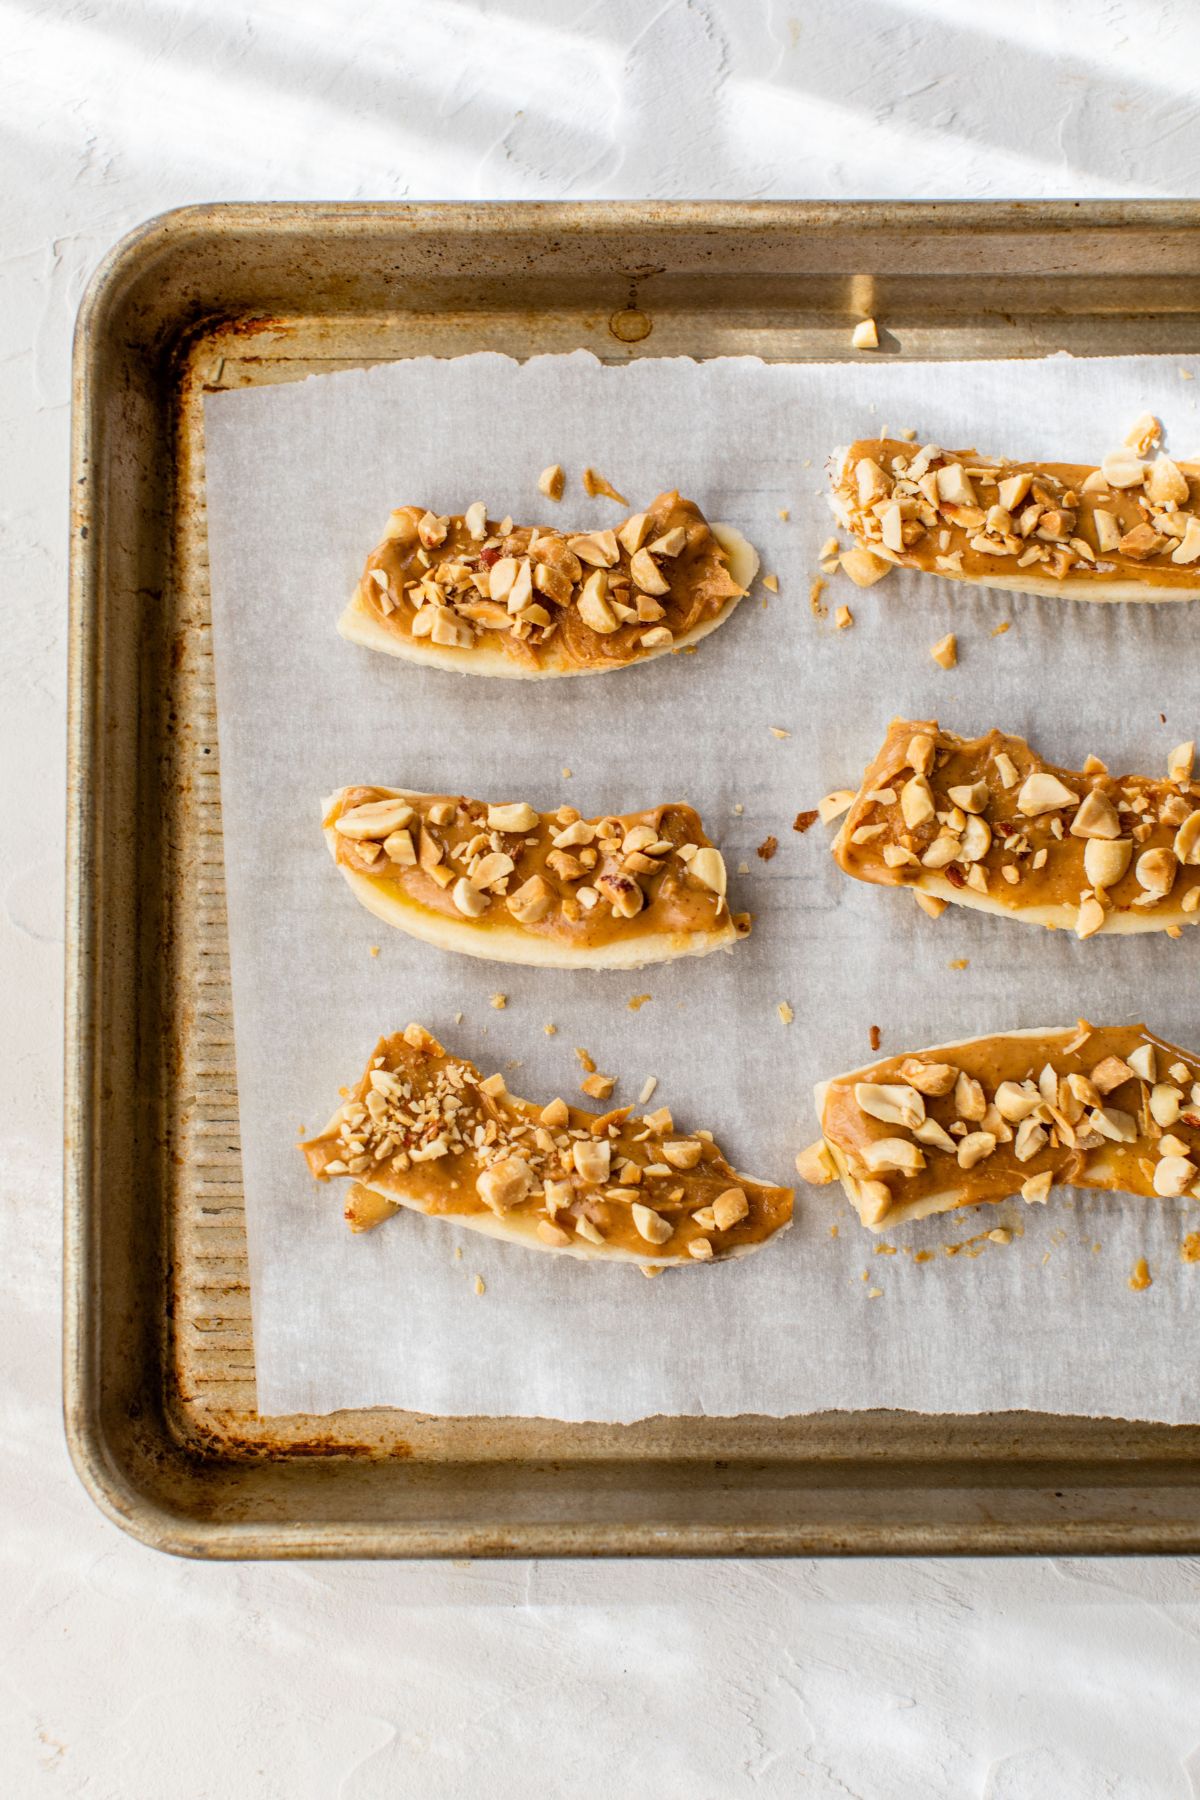 Banana slices covered with peanut butter and chopped peanuts.